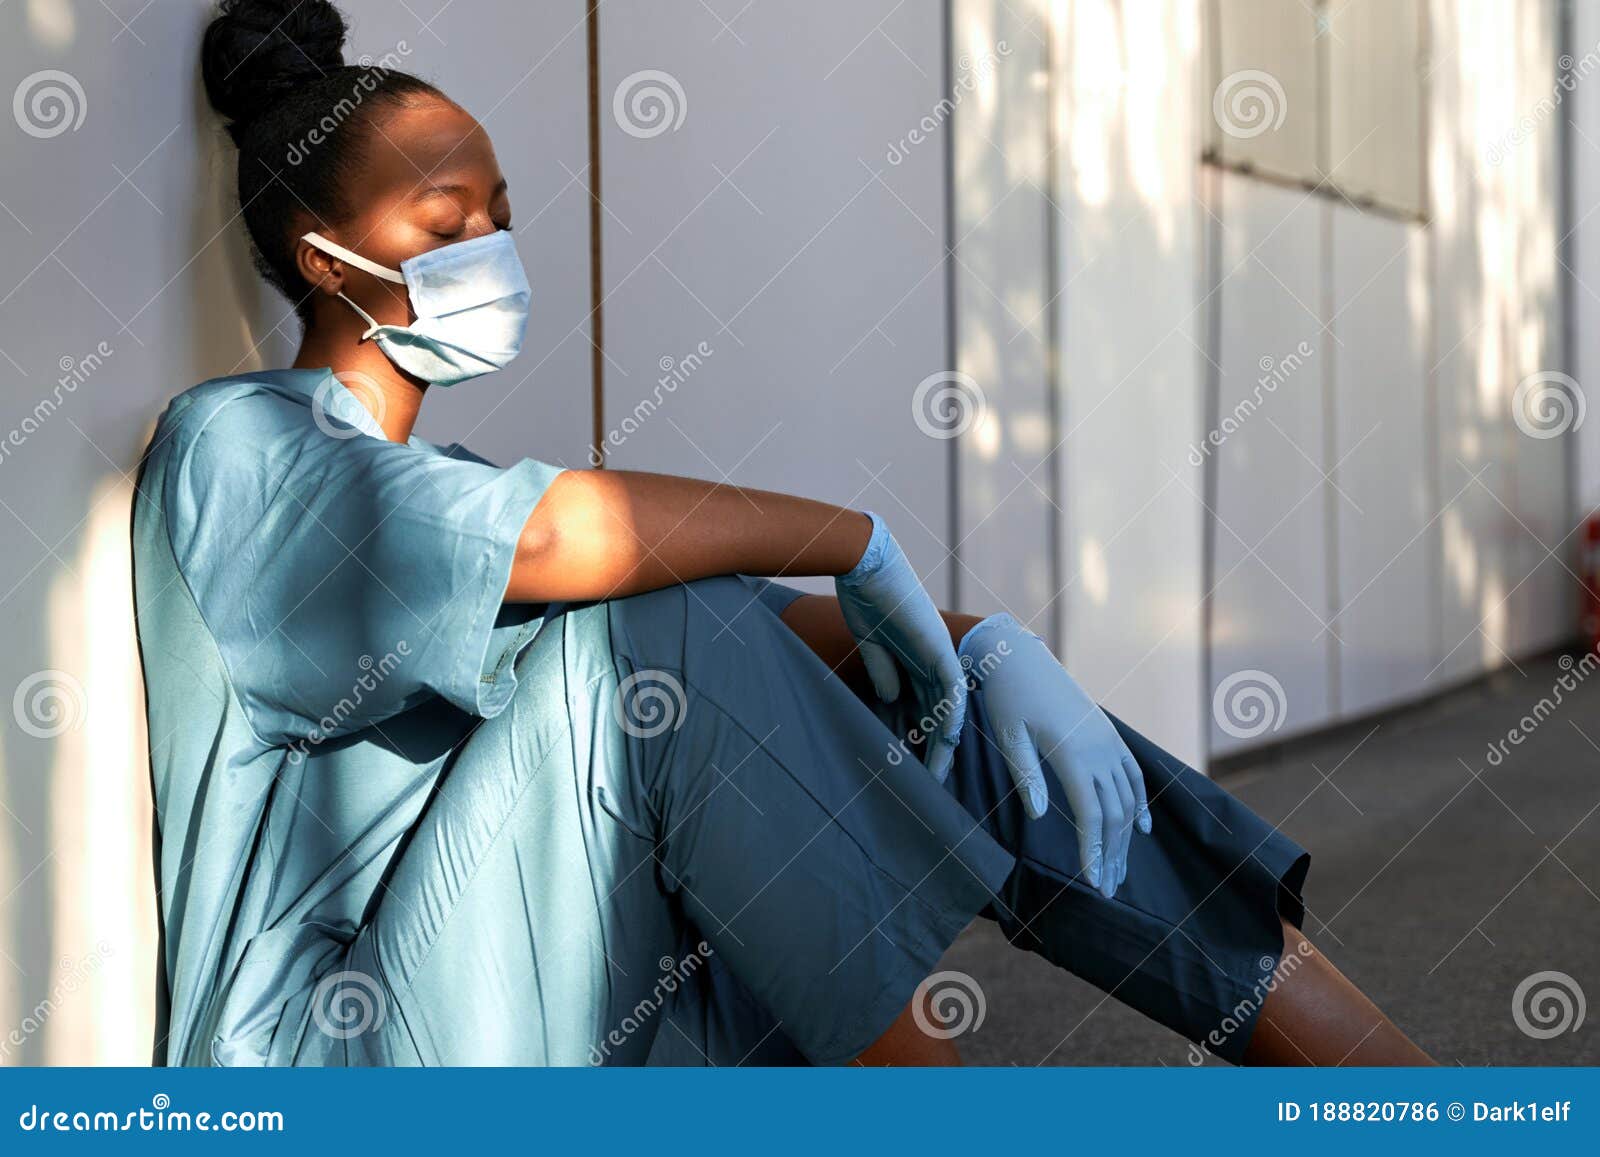 tired exhausted woman african nurse wear face mask gloves sit on hospital floor.